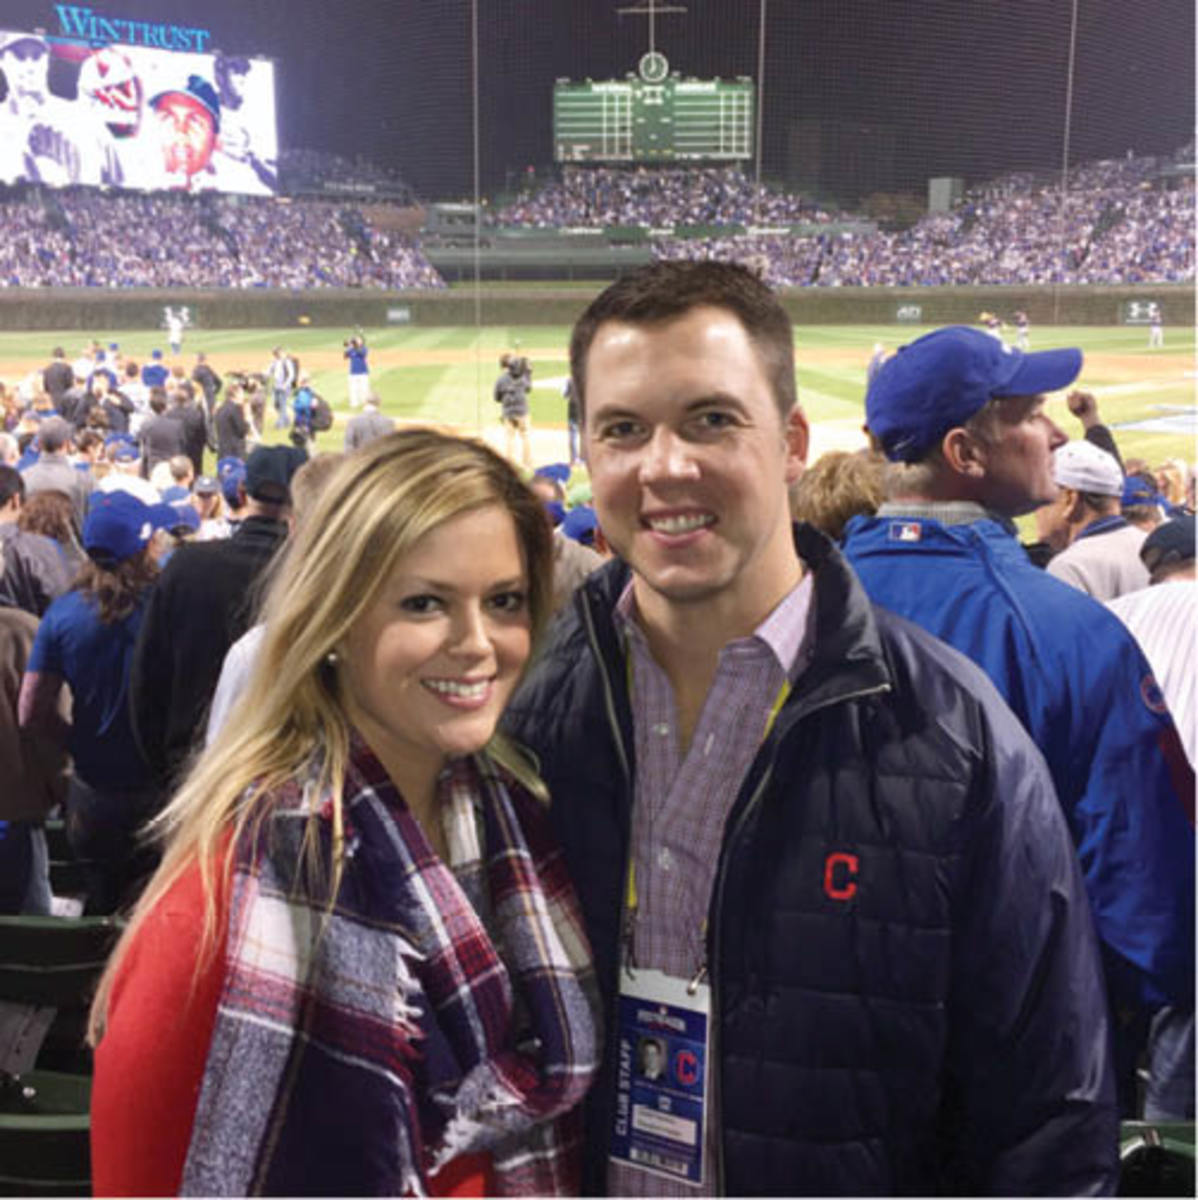 Hawkins and his fiancée, Lindsay Towry, at Chicago’s Wrigley Field during the 2016 World SeriesPhoto: Carter Hawkins